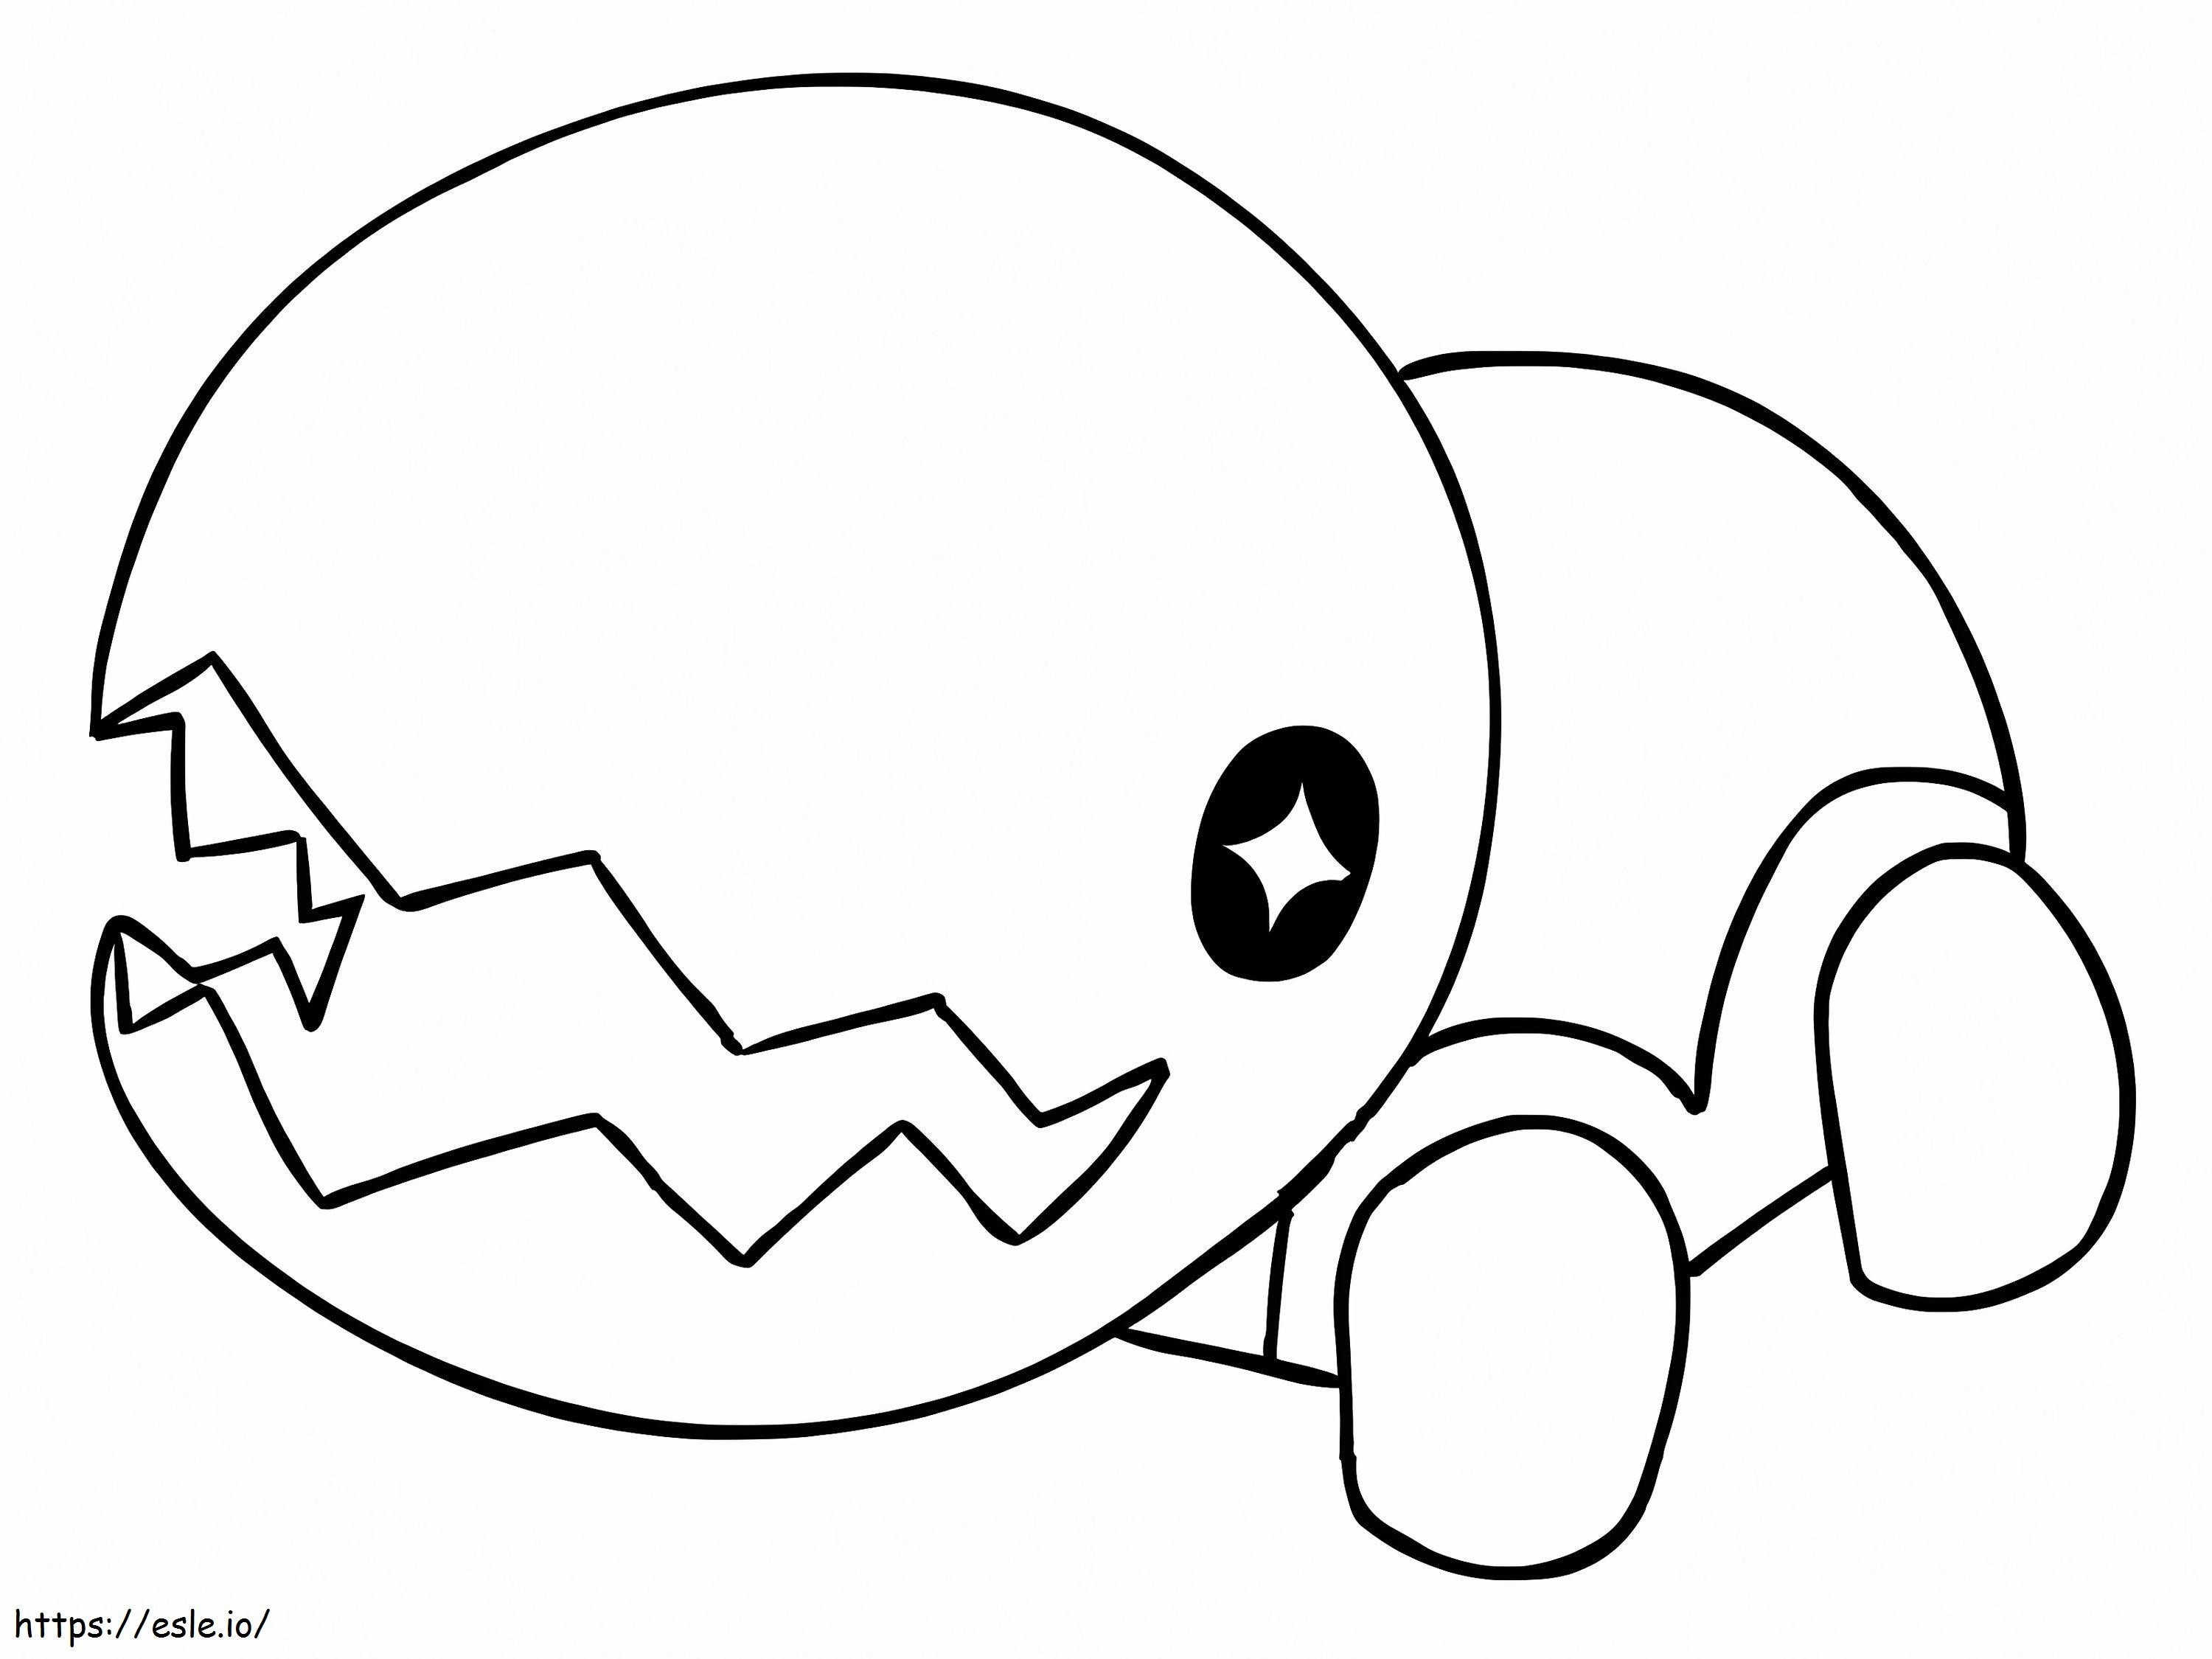 Trapinch Pokemon coloring page